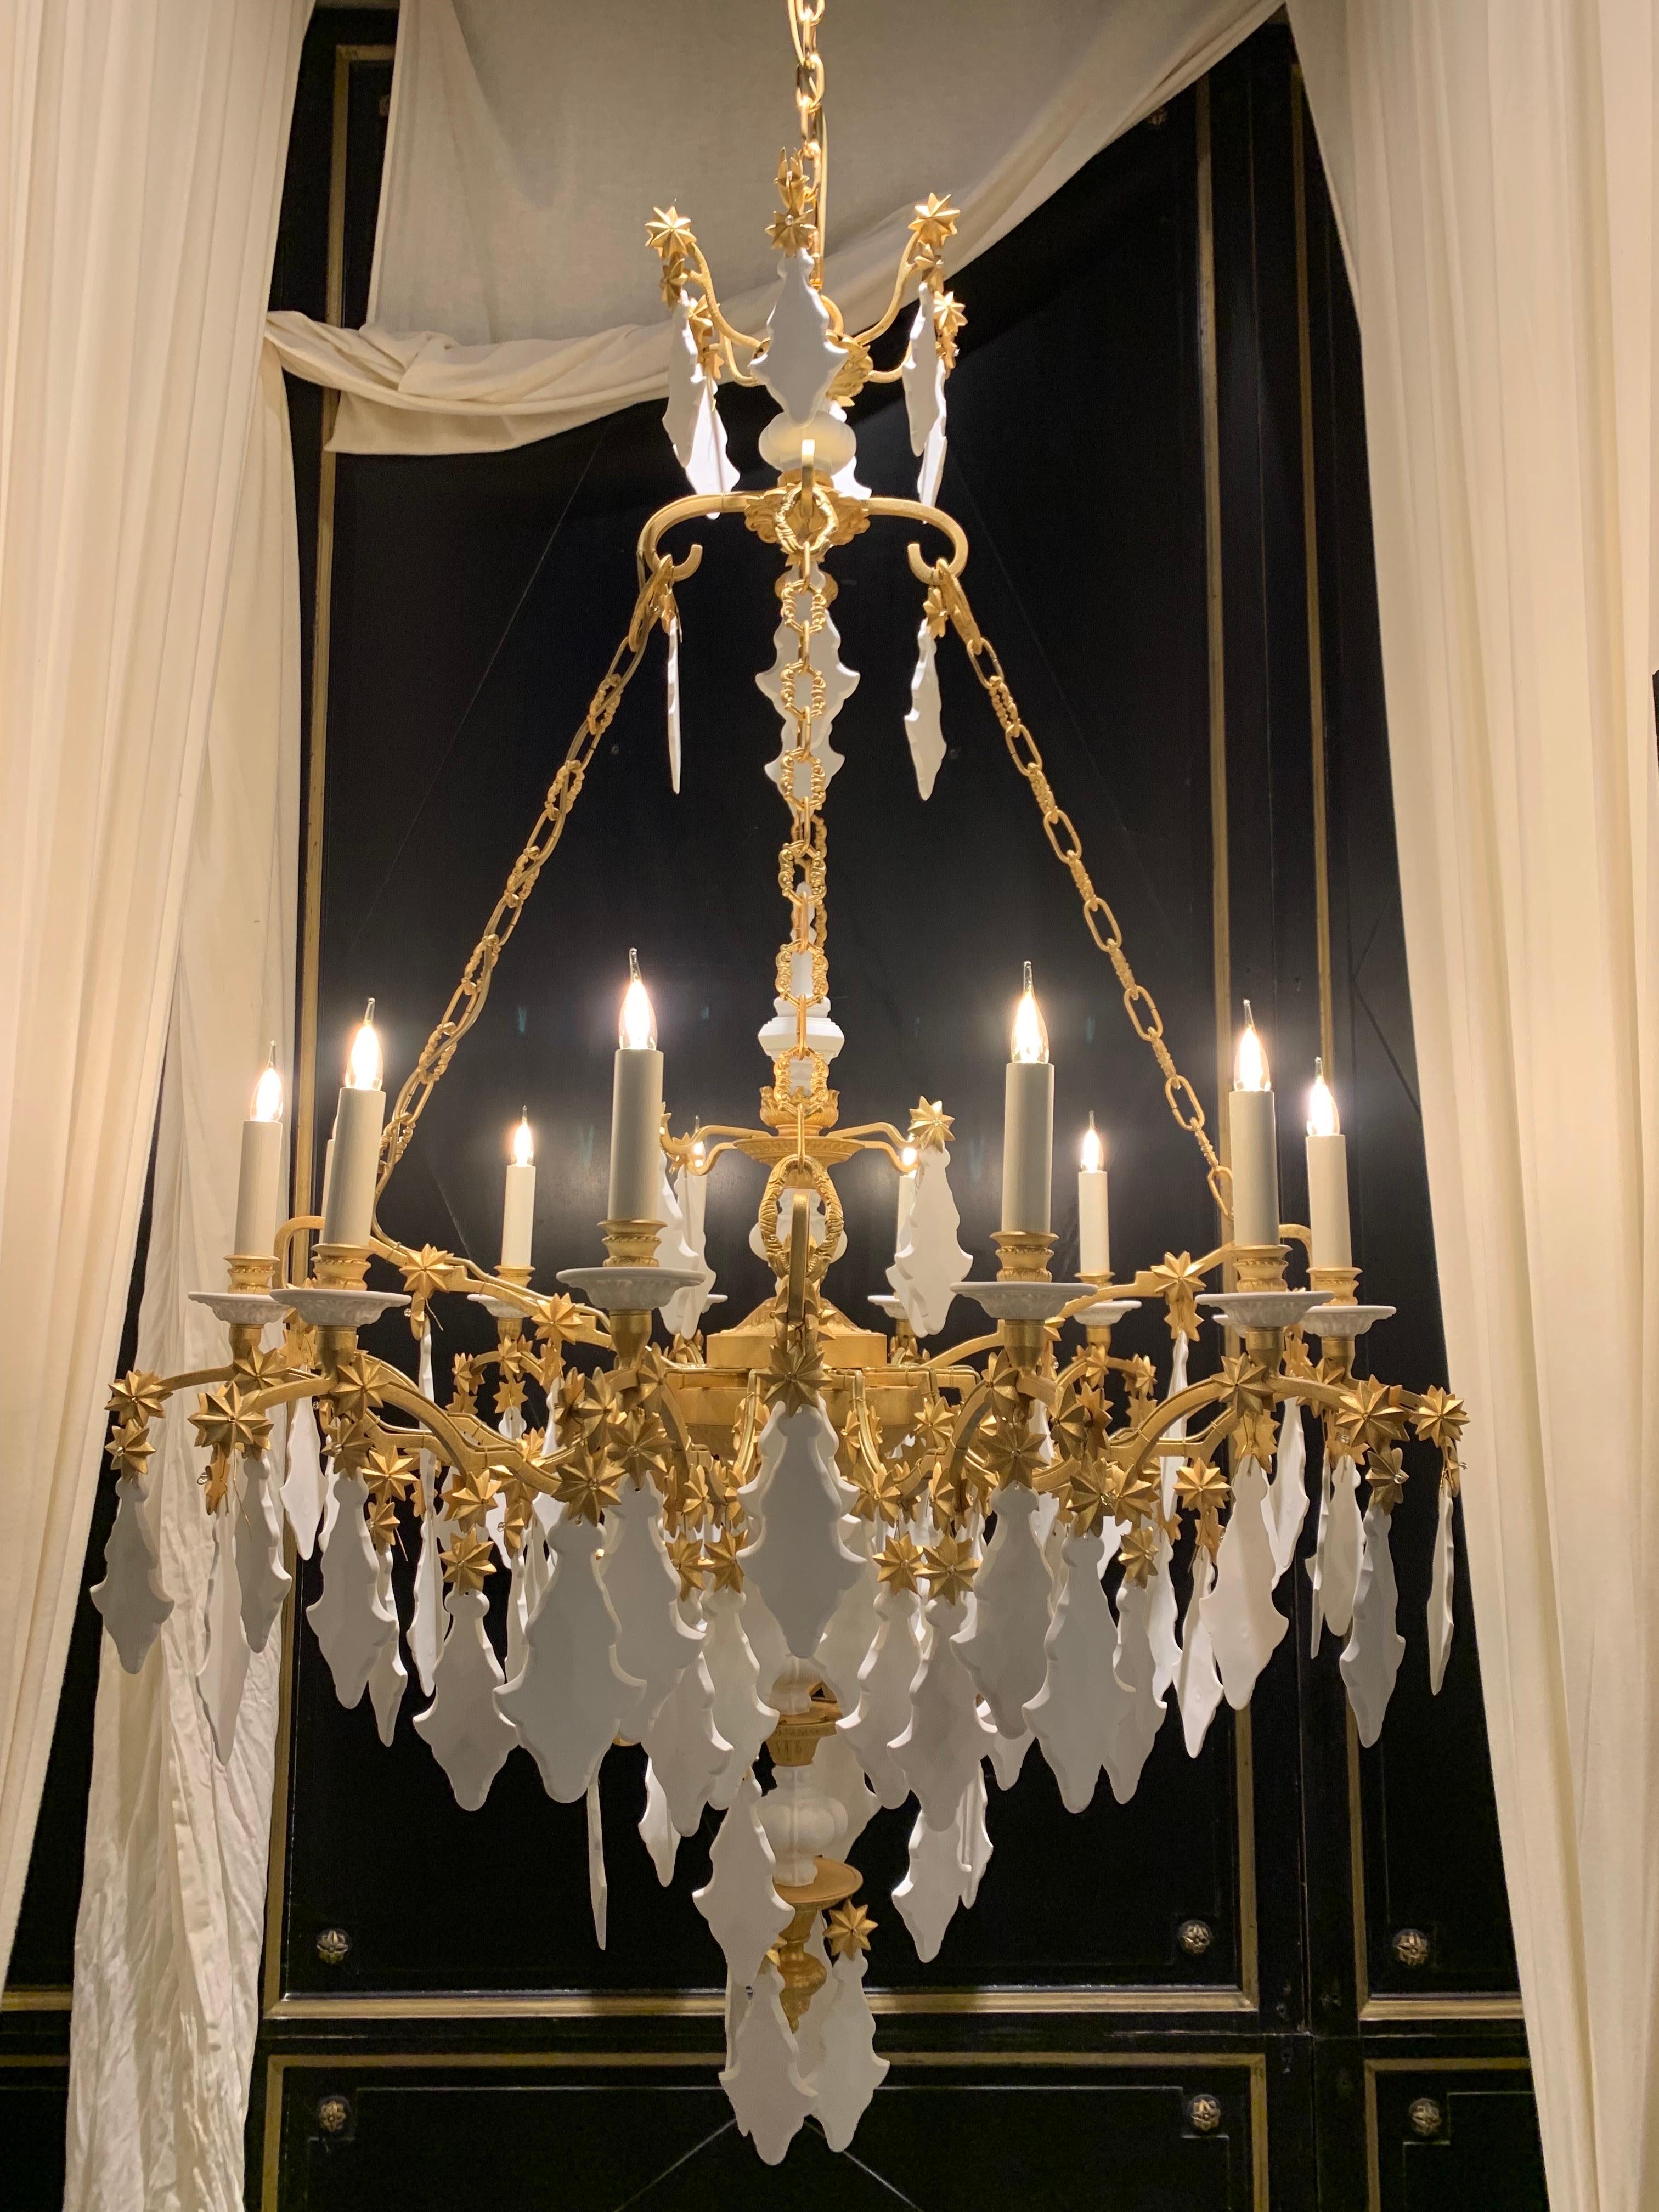 This chandelier is an original variation of the chain models that could be found in the eighteenth century, like the one with the torch, from the Louis XVI period, at the Palace of Versailles.
On a central openwork bowl surmounted by a metal